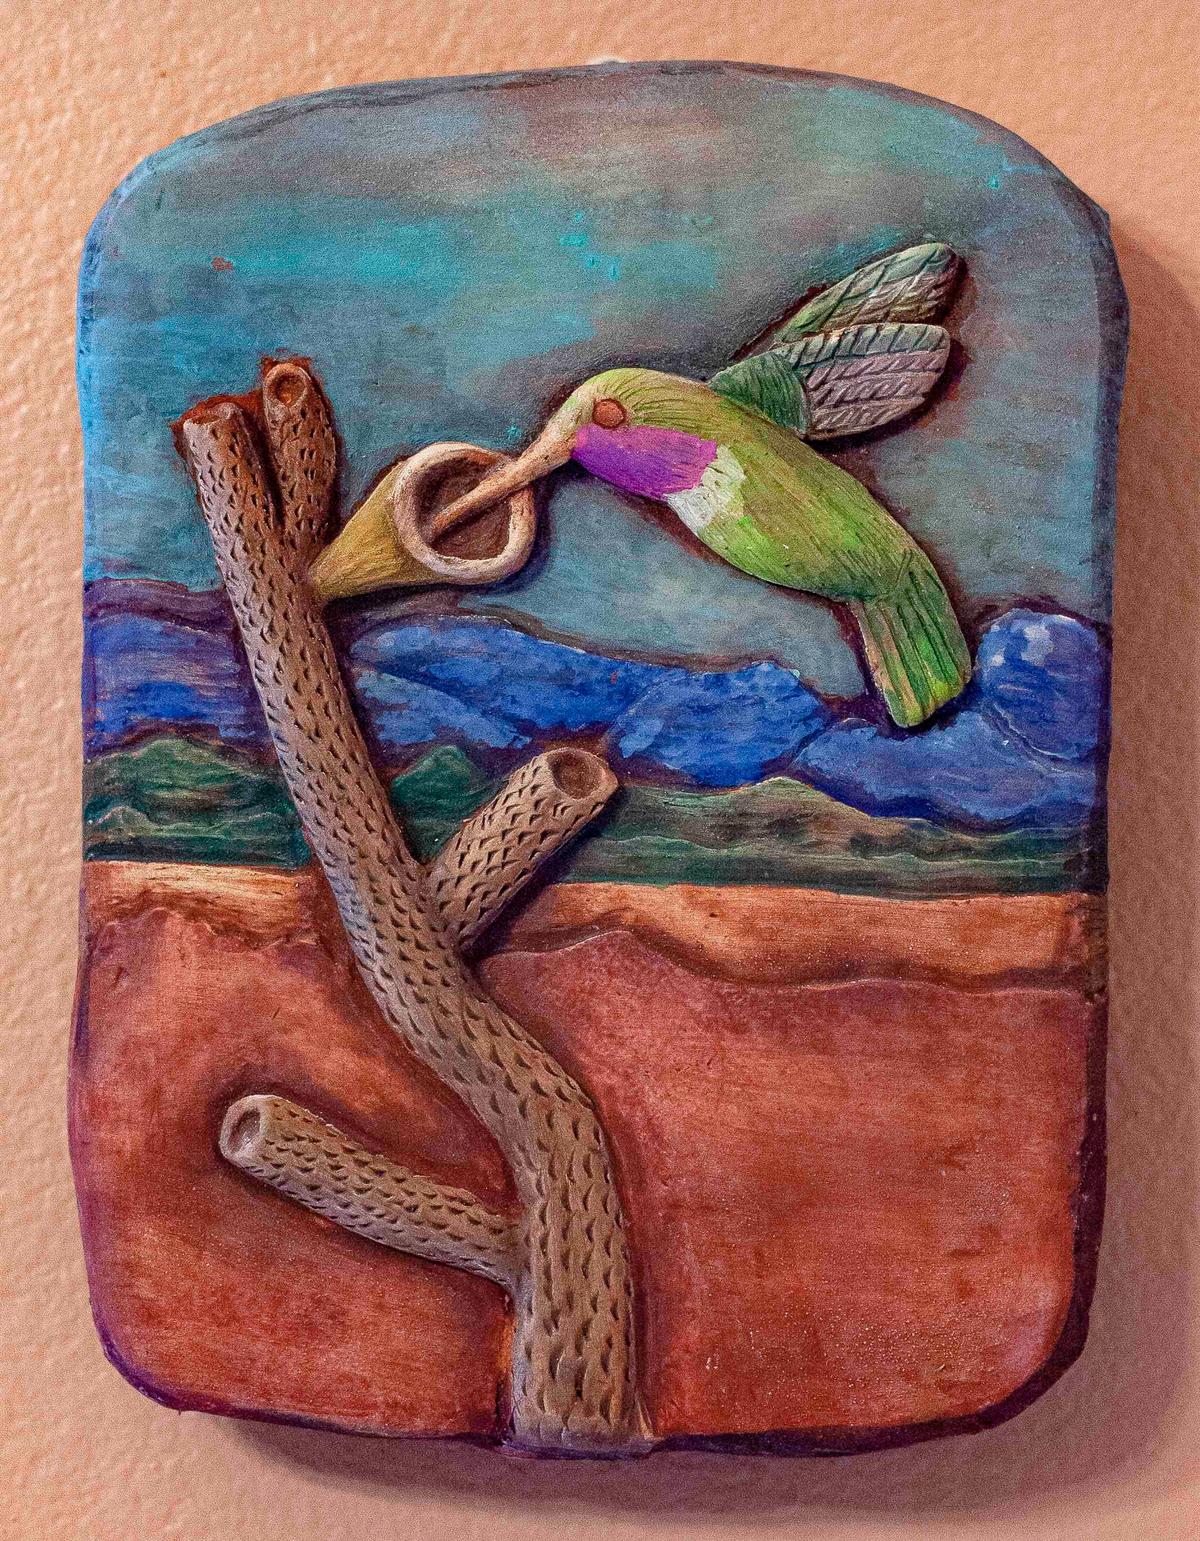 Coming to grips with his blindness, the hummingbird had special meaning for Lopez. "Even in the most turbulent winds, a hummingbird finds stability and peace. So do I." (Courtesy of Rich Lopez)